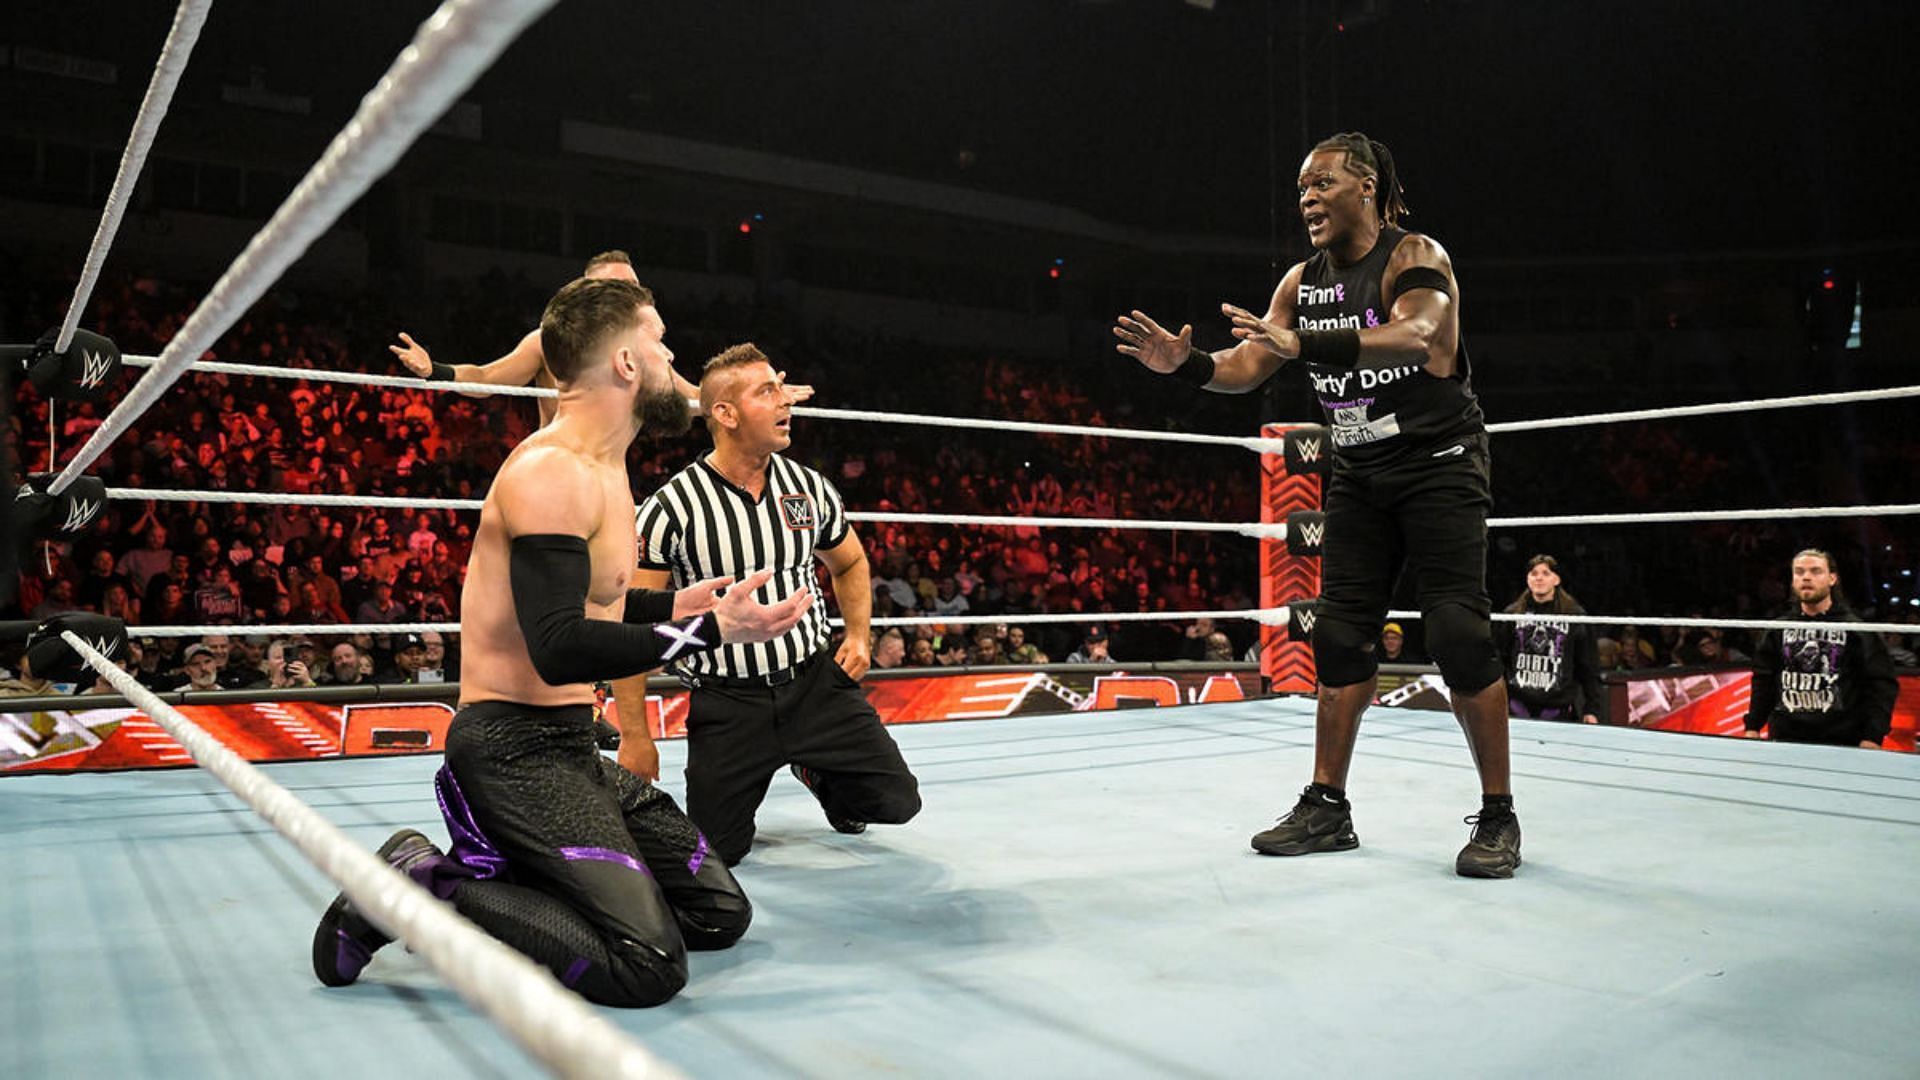 R-Truth is currently involved in a storyline with The Judgment Day